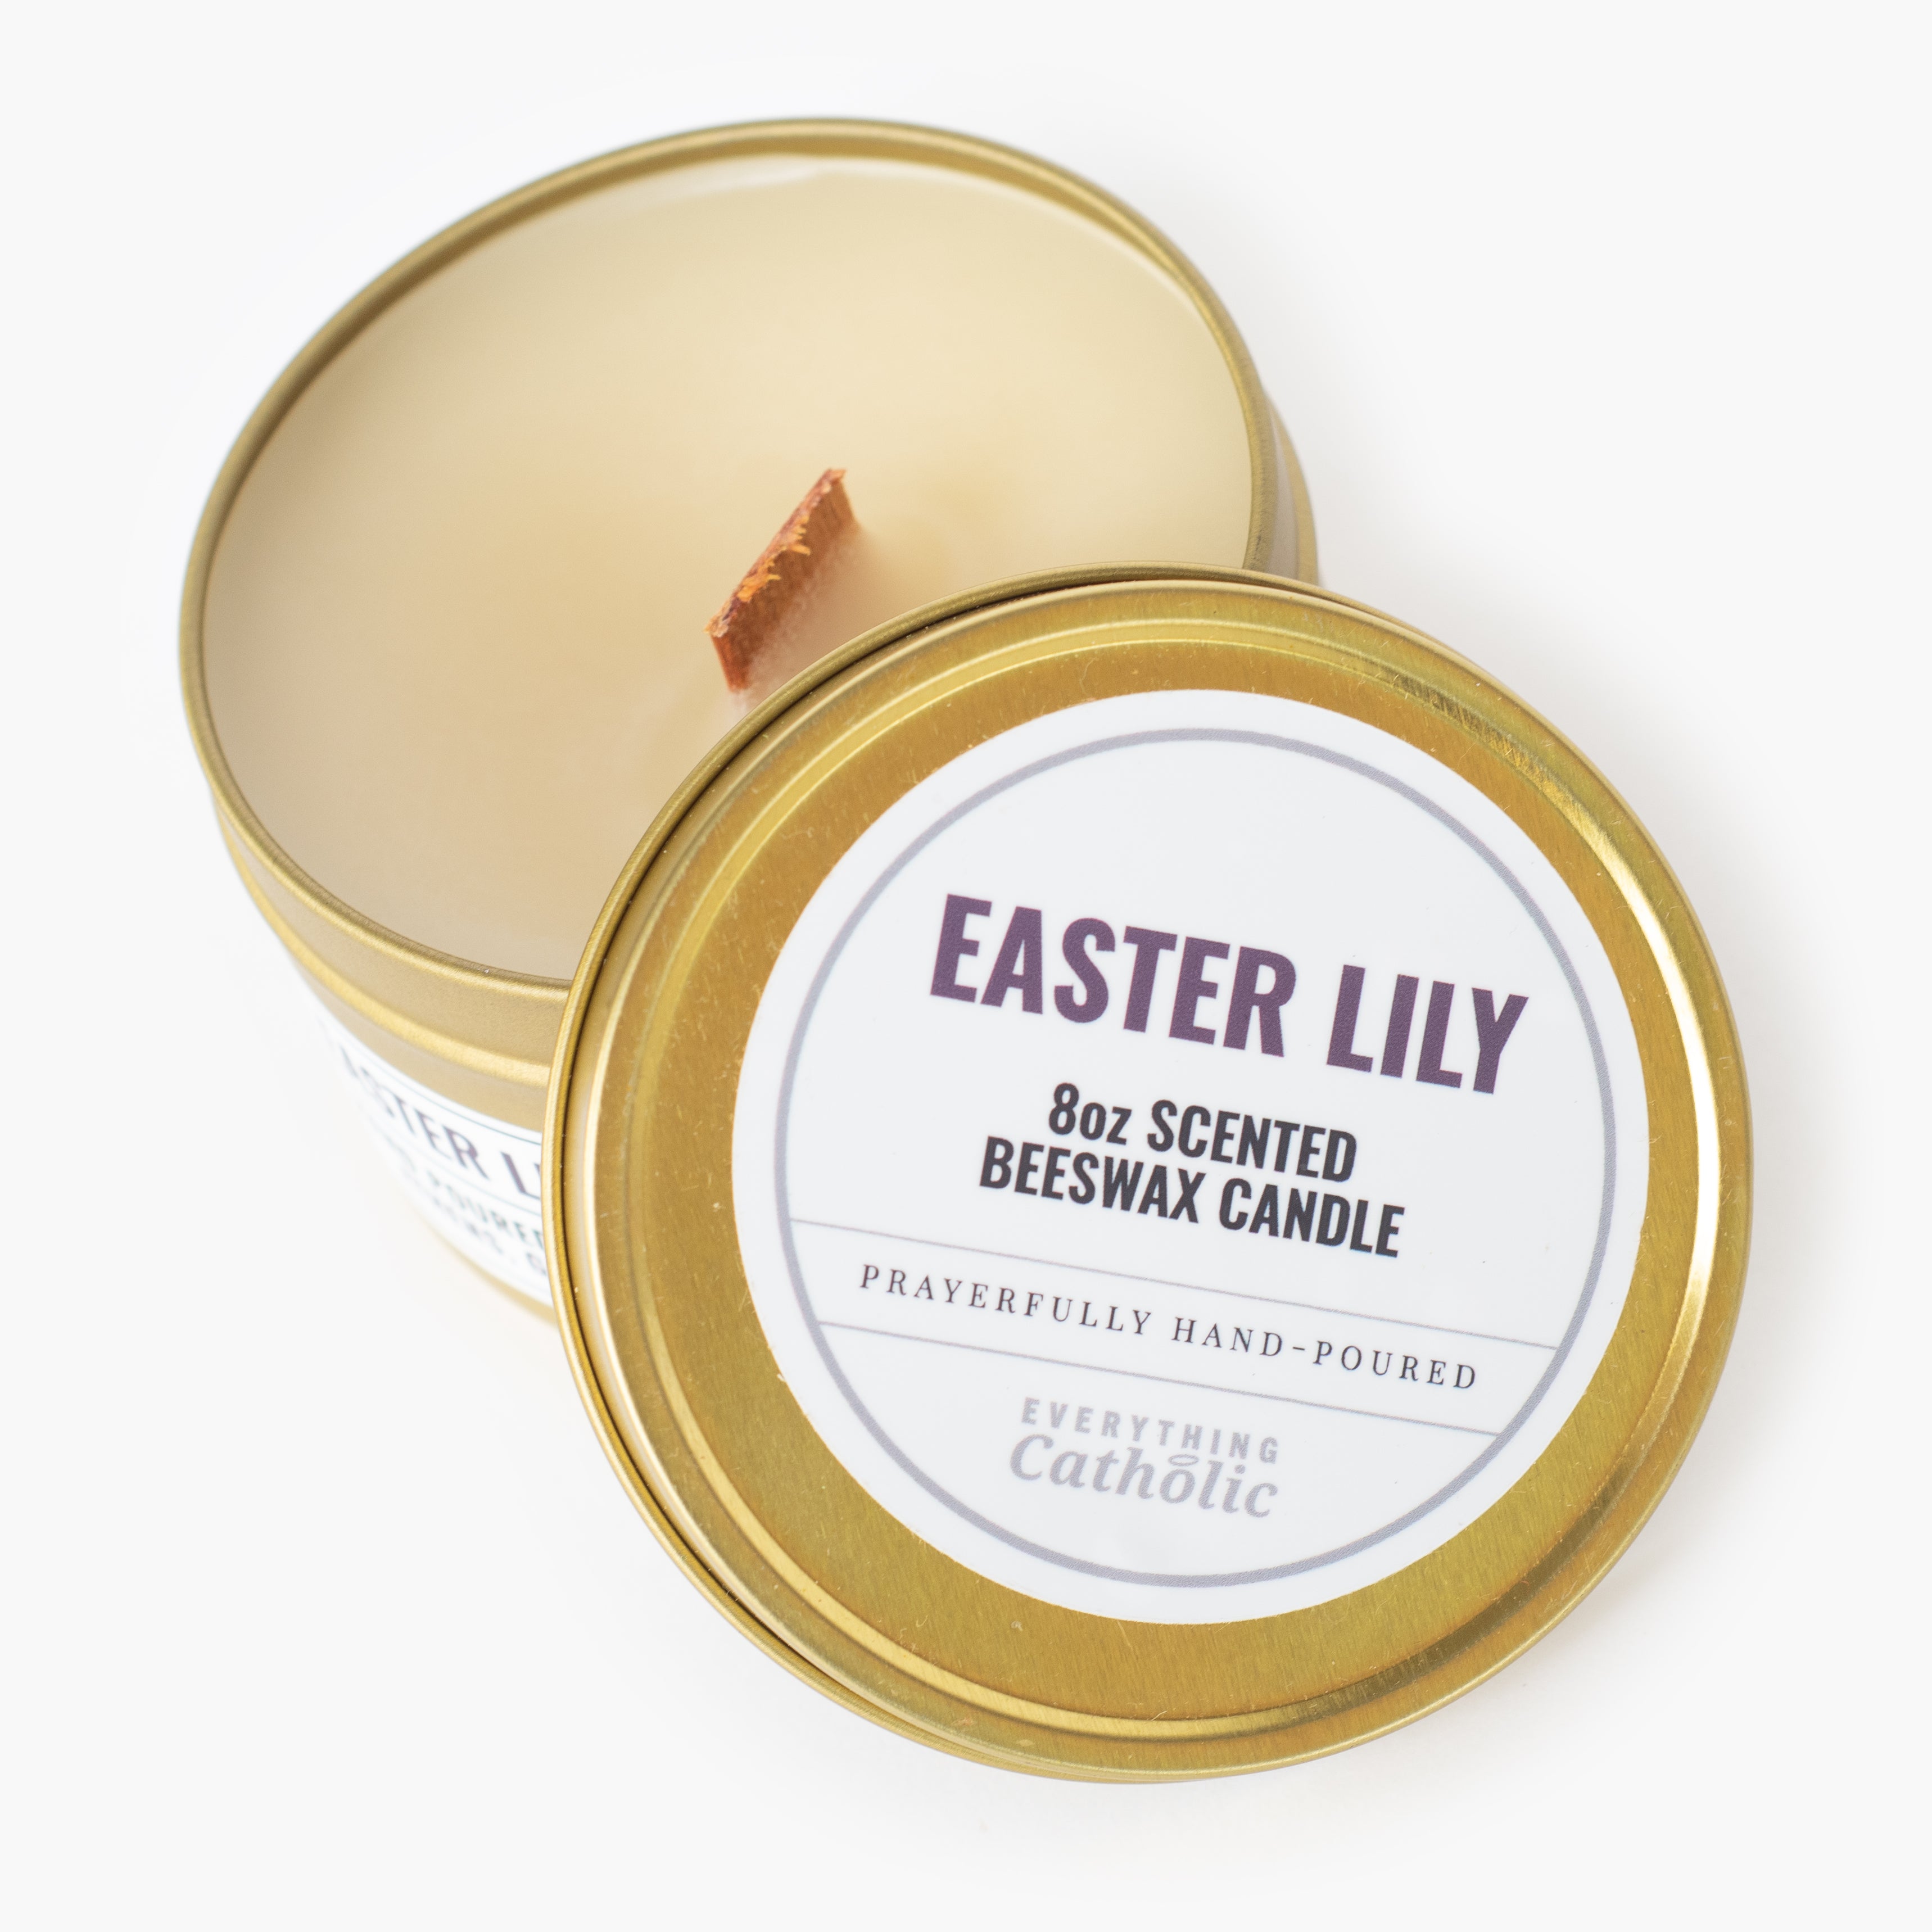 Easter Lily Beeswax Candle